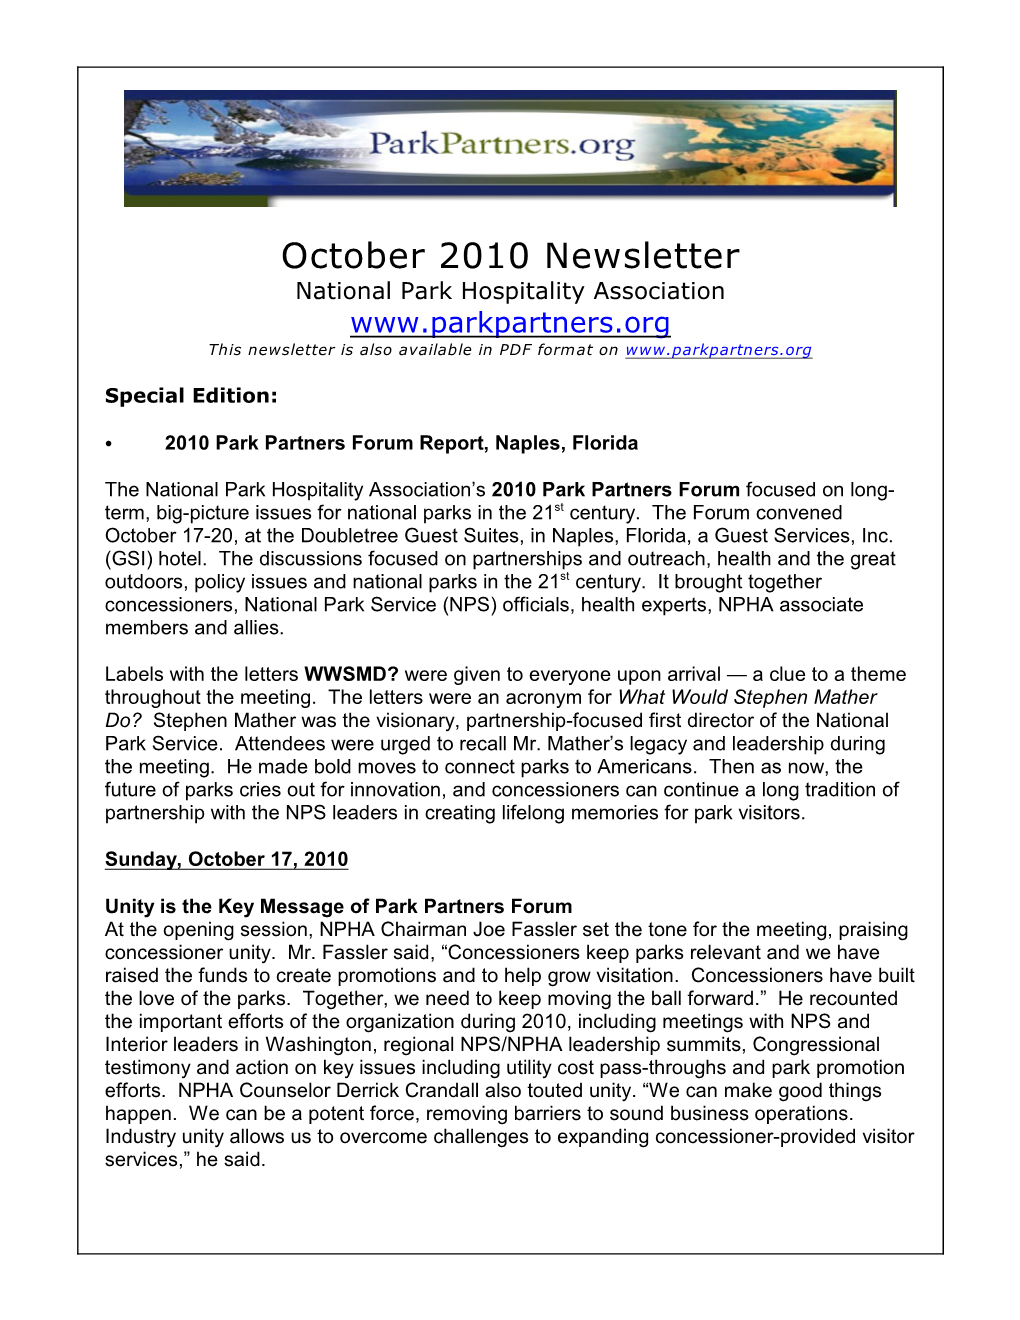 October 2010 Newsletter National Park Hospitality Association This Newsletter Is Also Available in PDF Format On